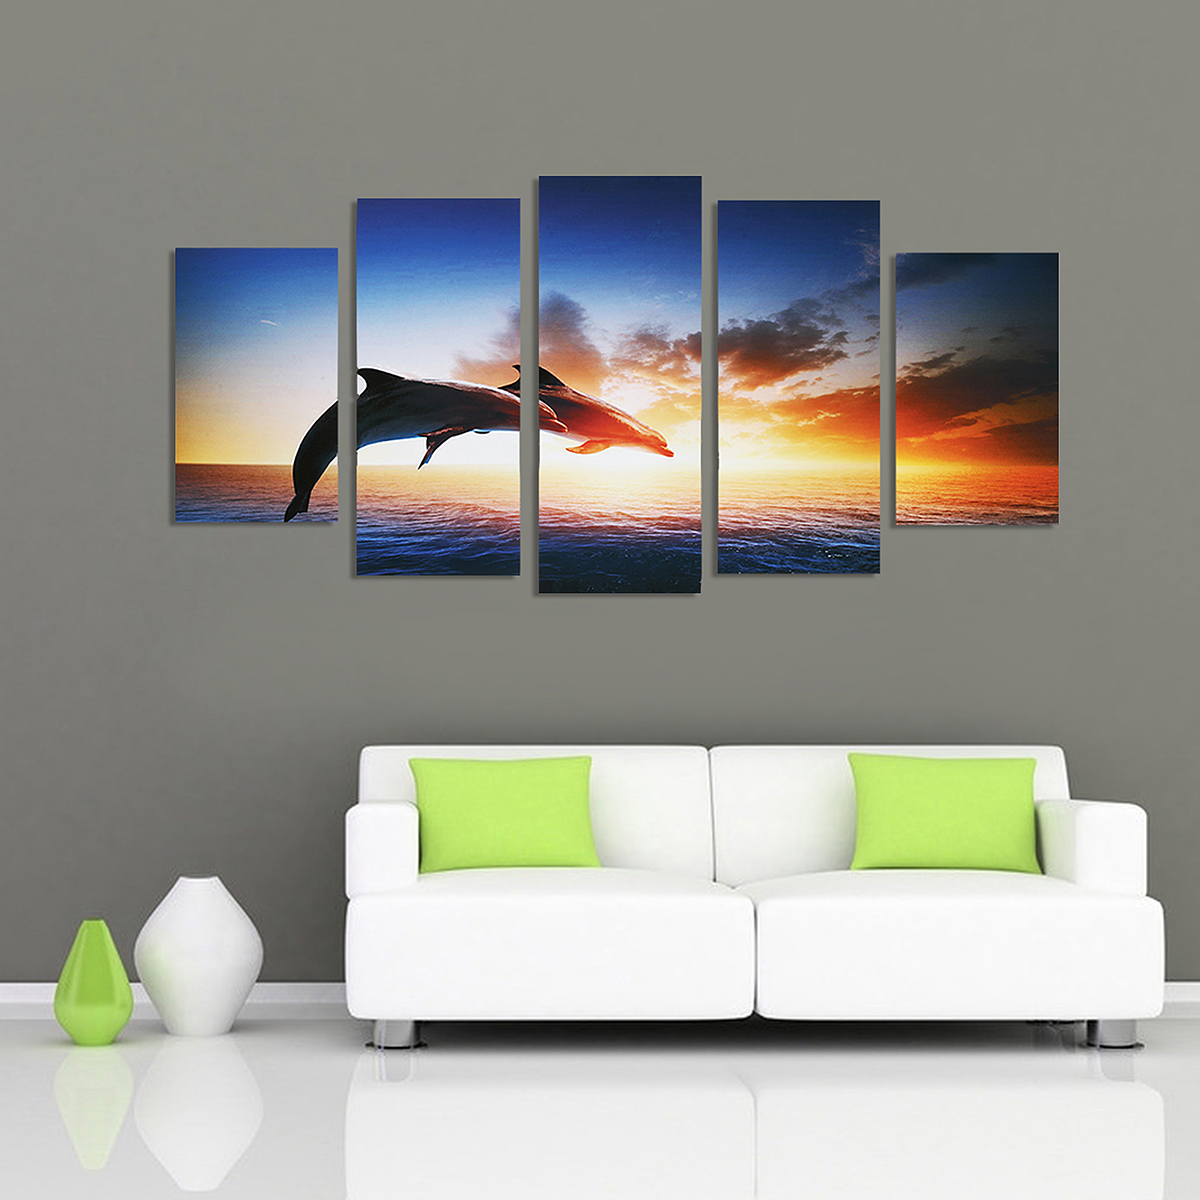 Dolphin-Sunset-Canvas-Print-Paintings-Poster-Wall-Art-Picture-Home-Decor-Unframed-1638931-3